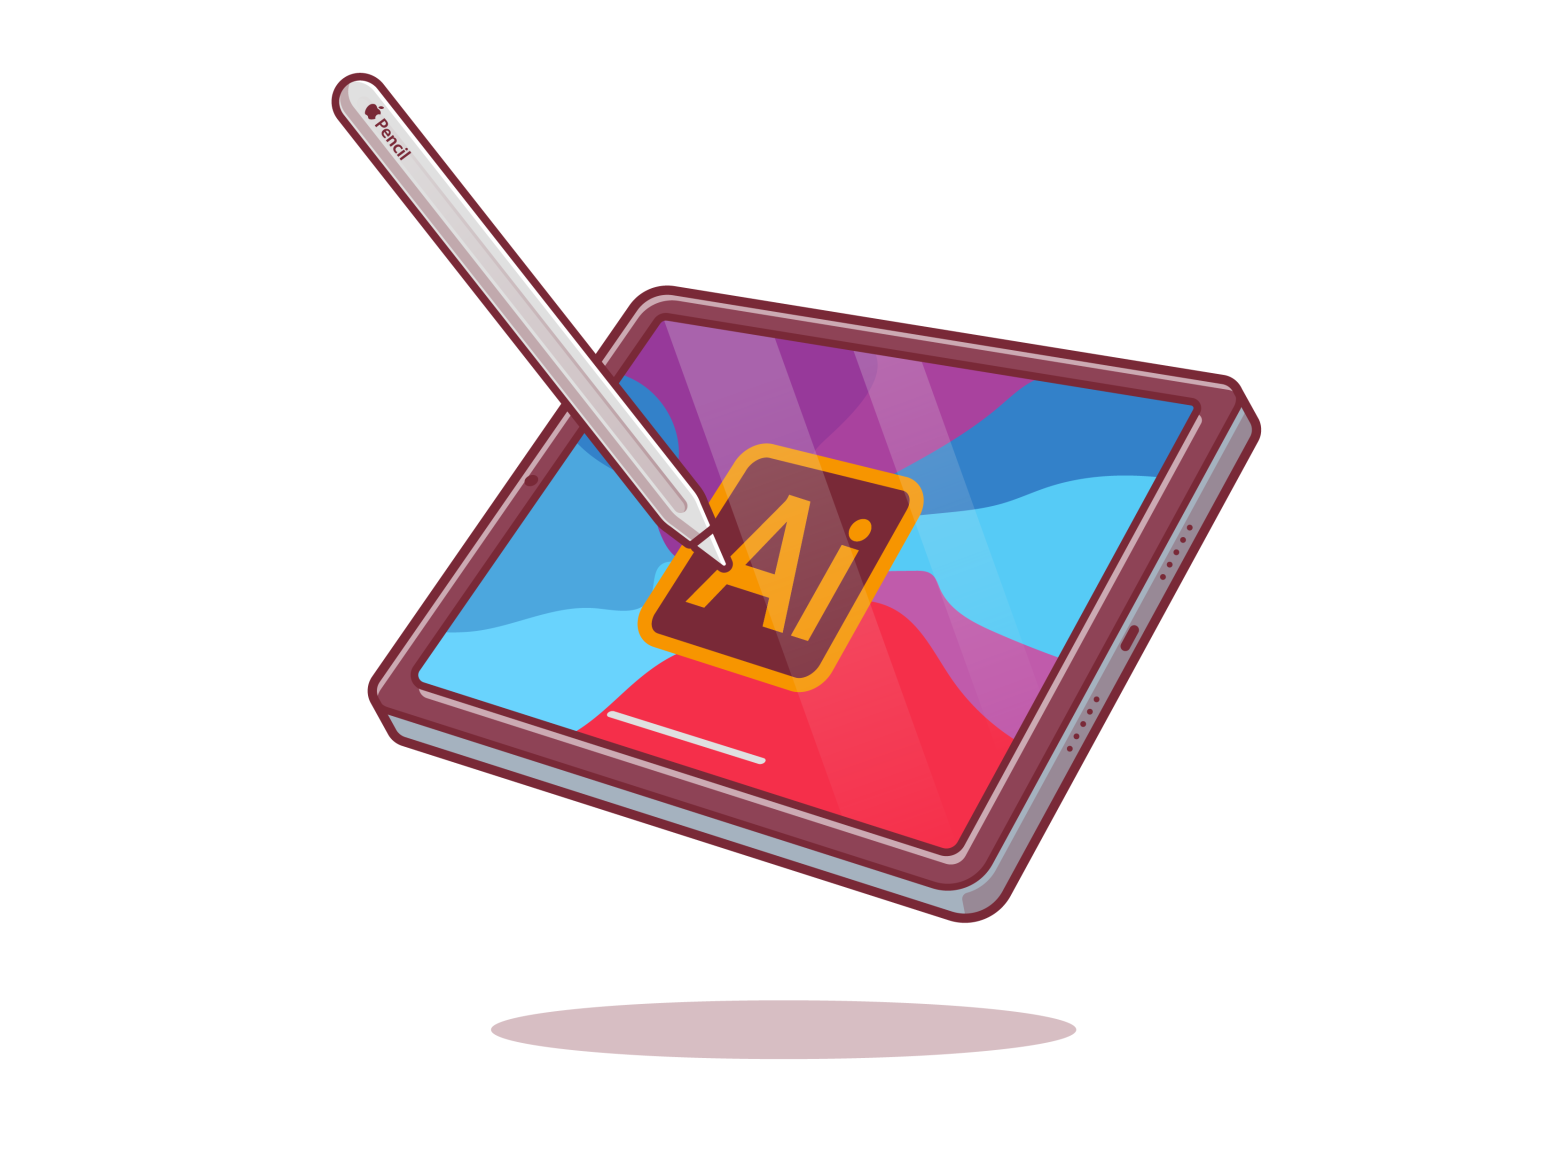 It S Finally Here Illustrator For Ipad Is Out Now By Catalyst On Dribbble